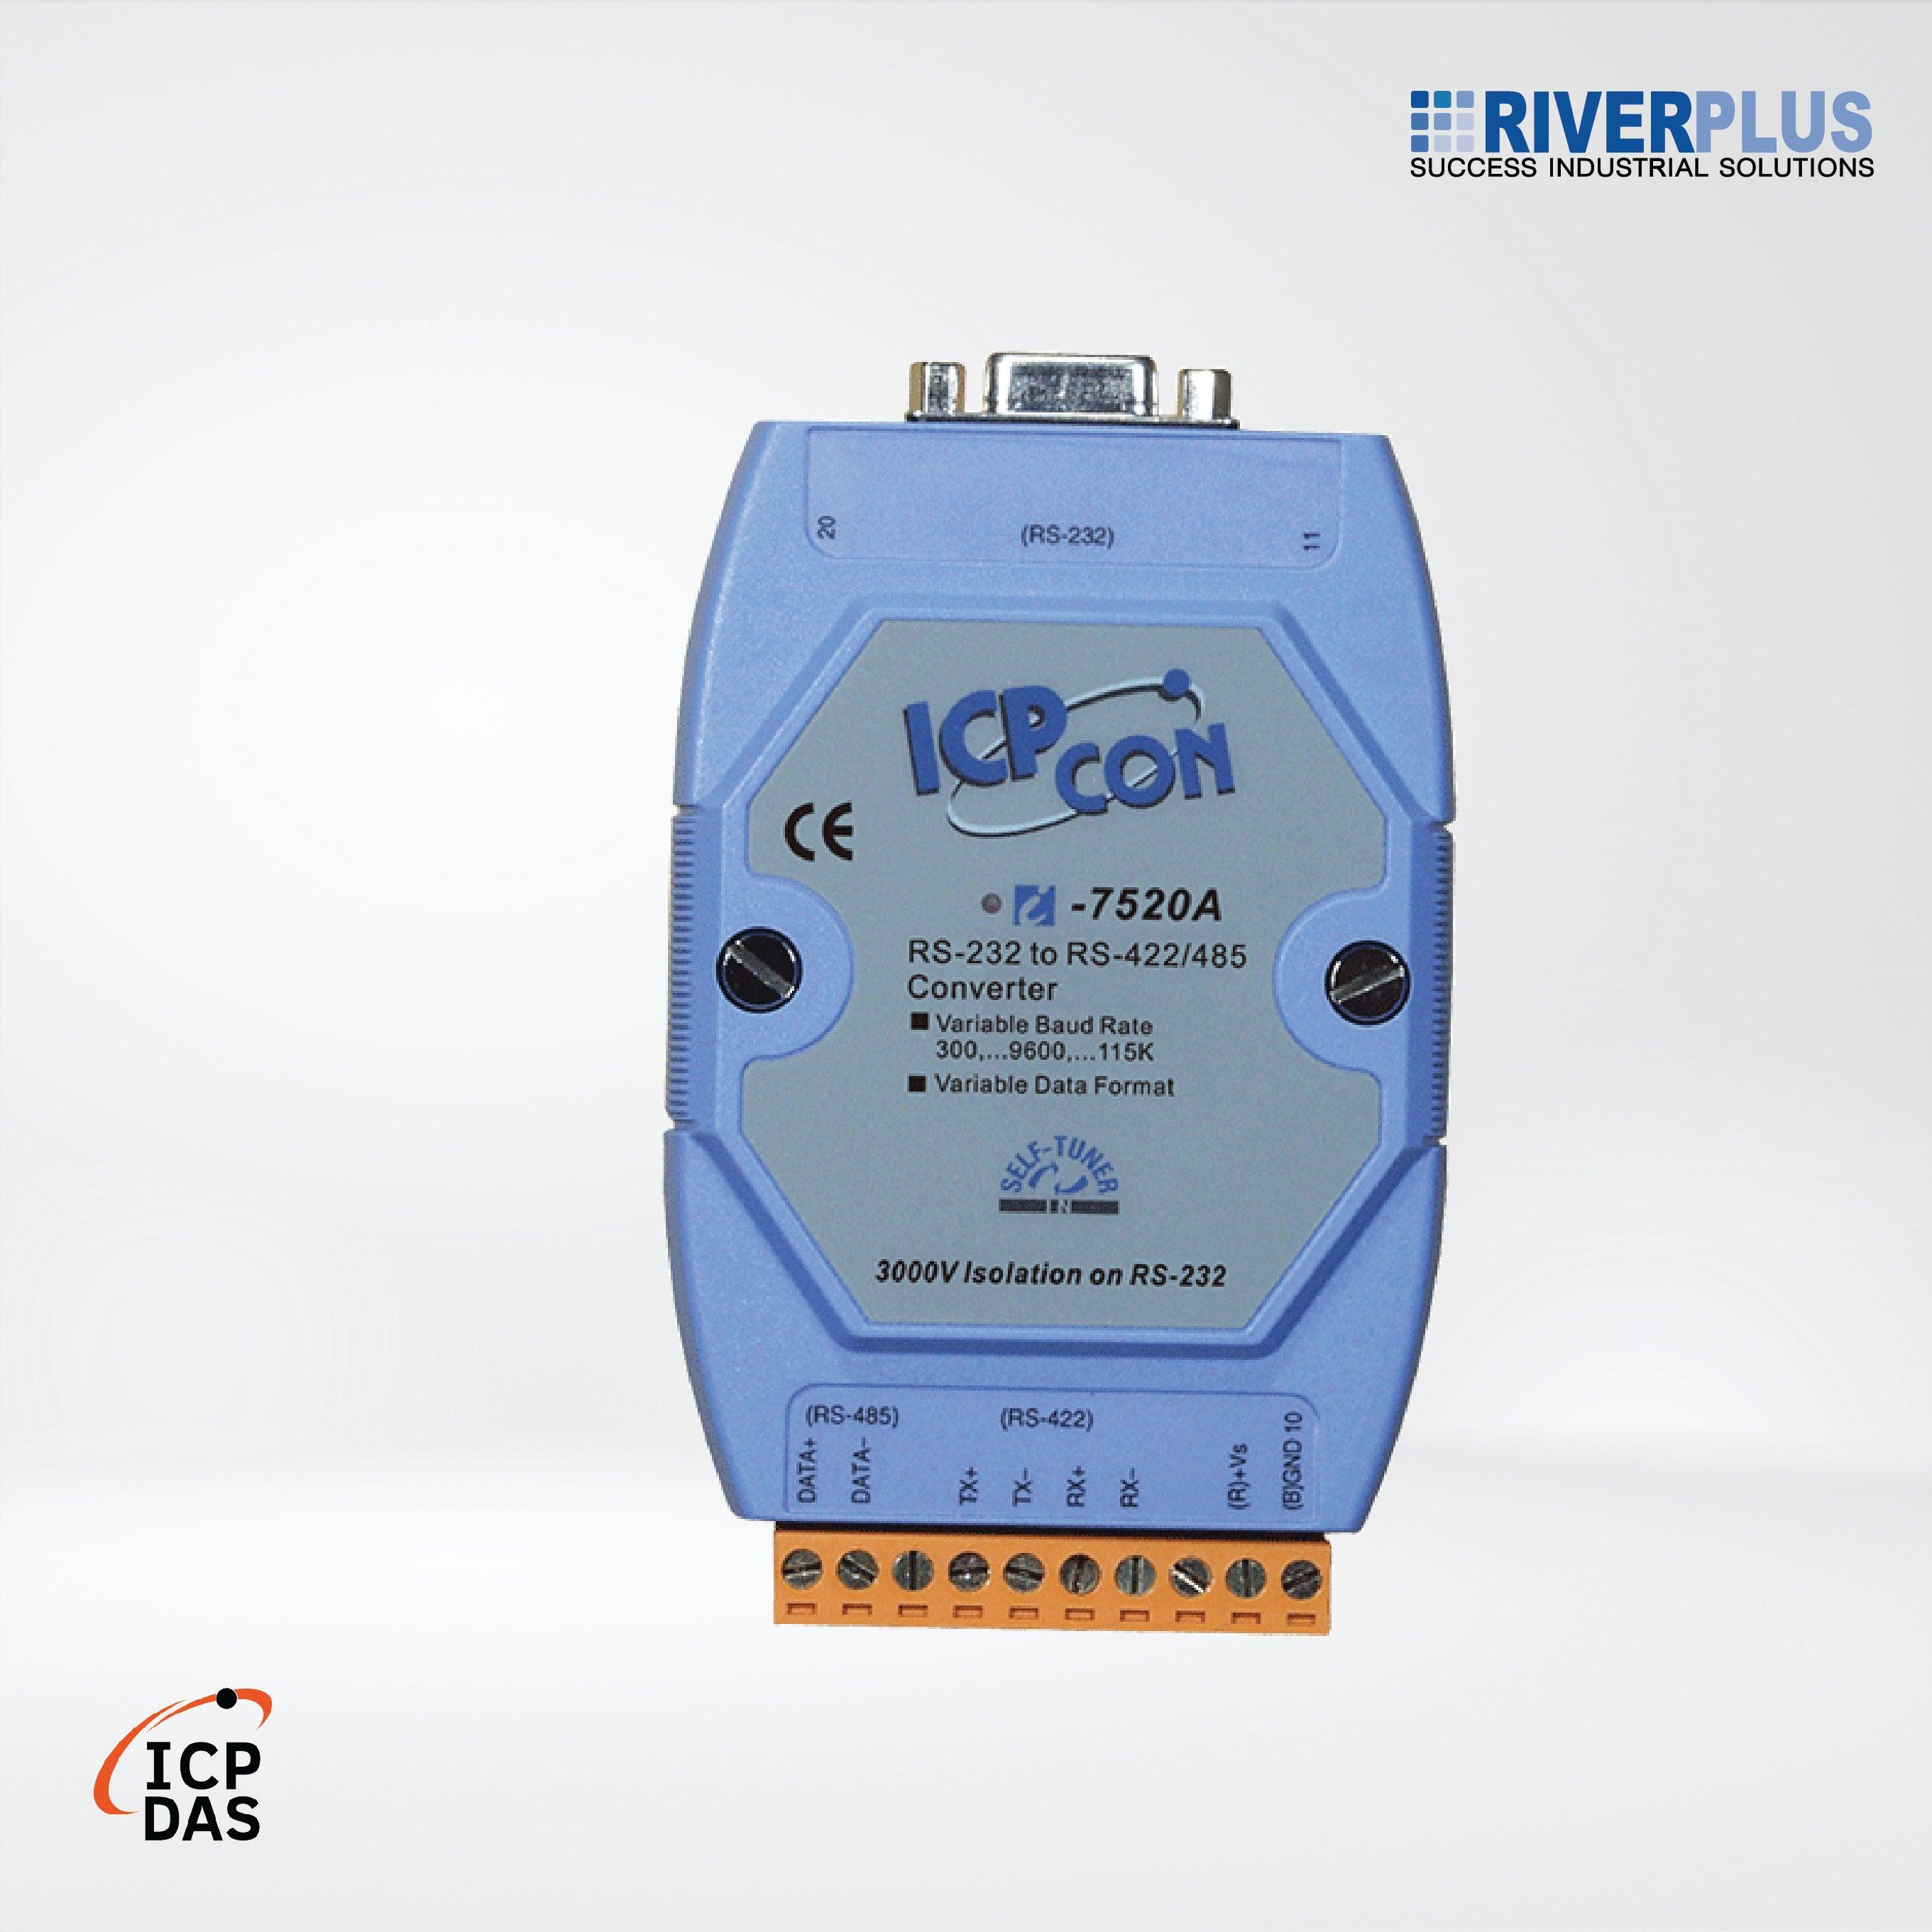 I-7520A Isolated RS-232 to RS-422/485 Converter - Riverplus